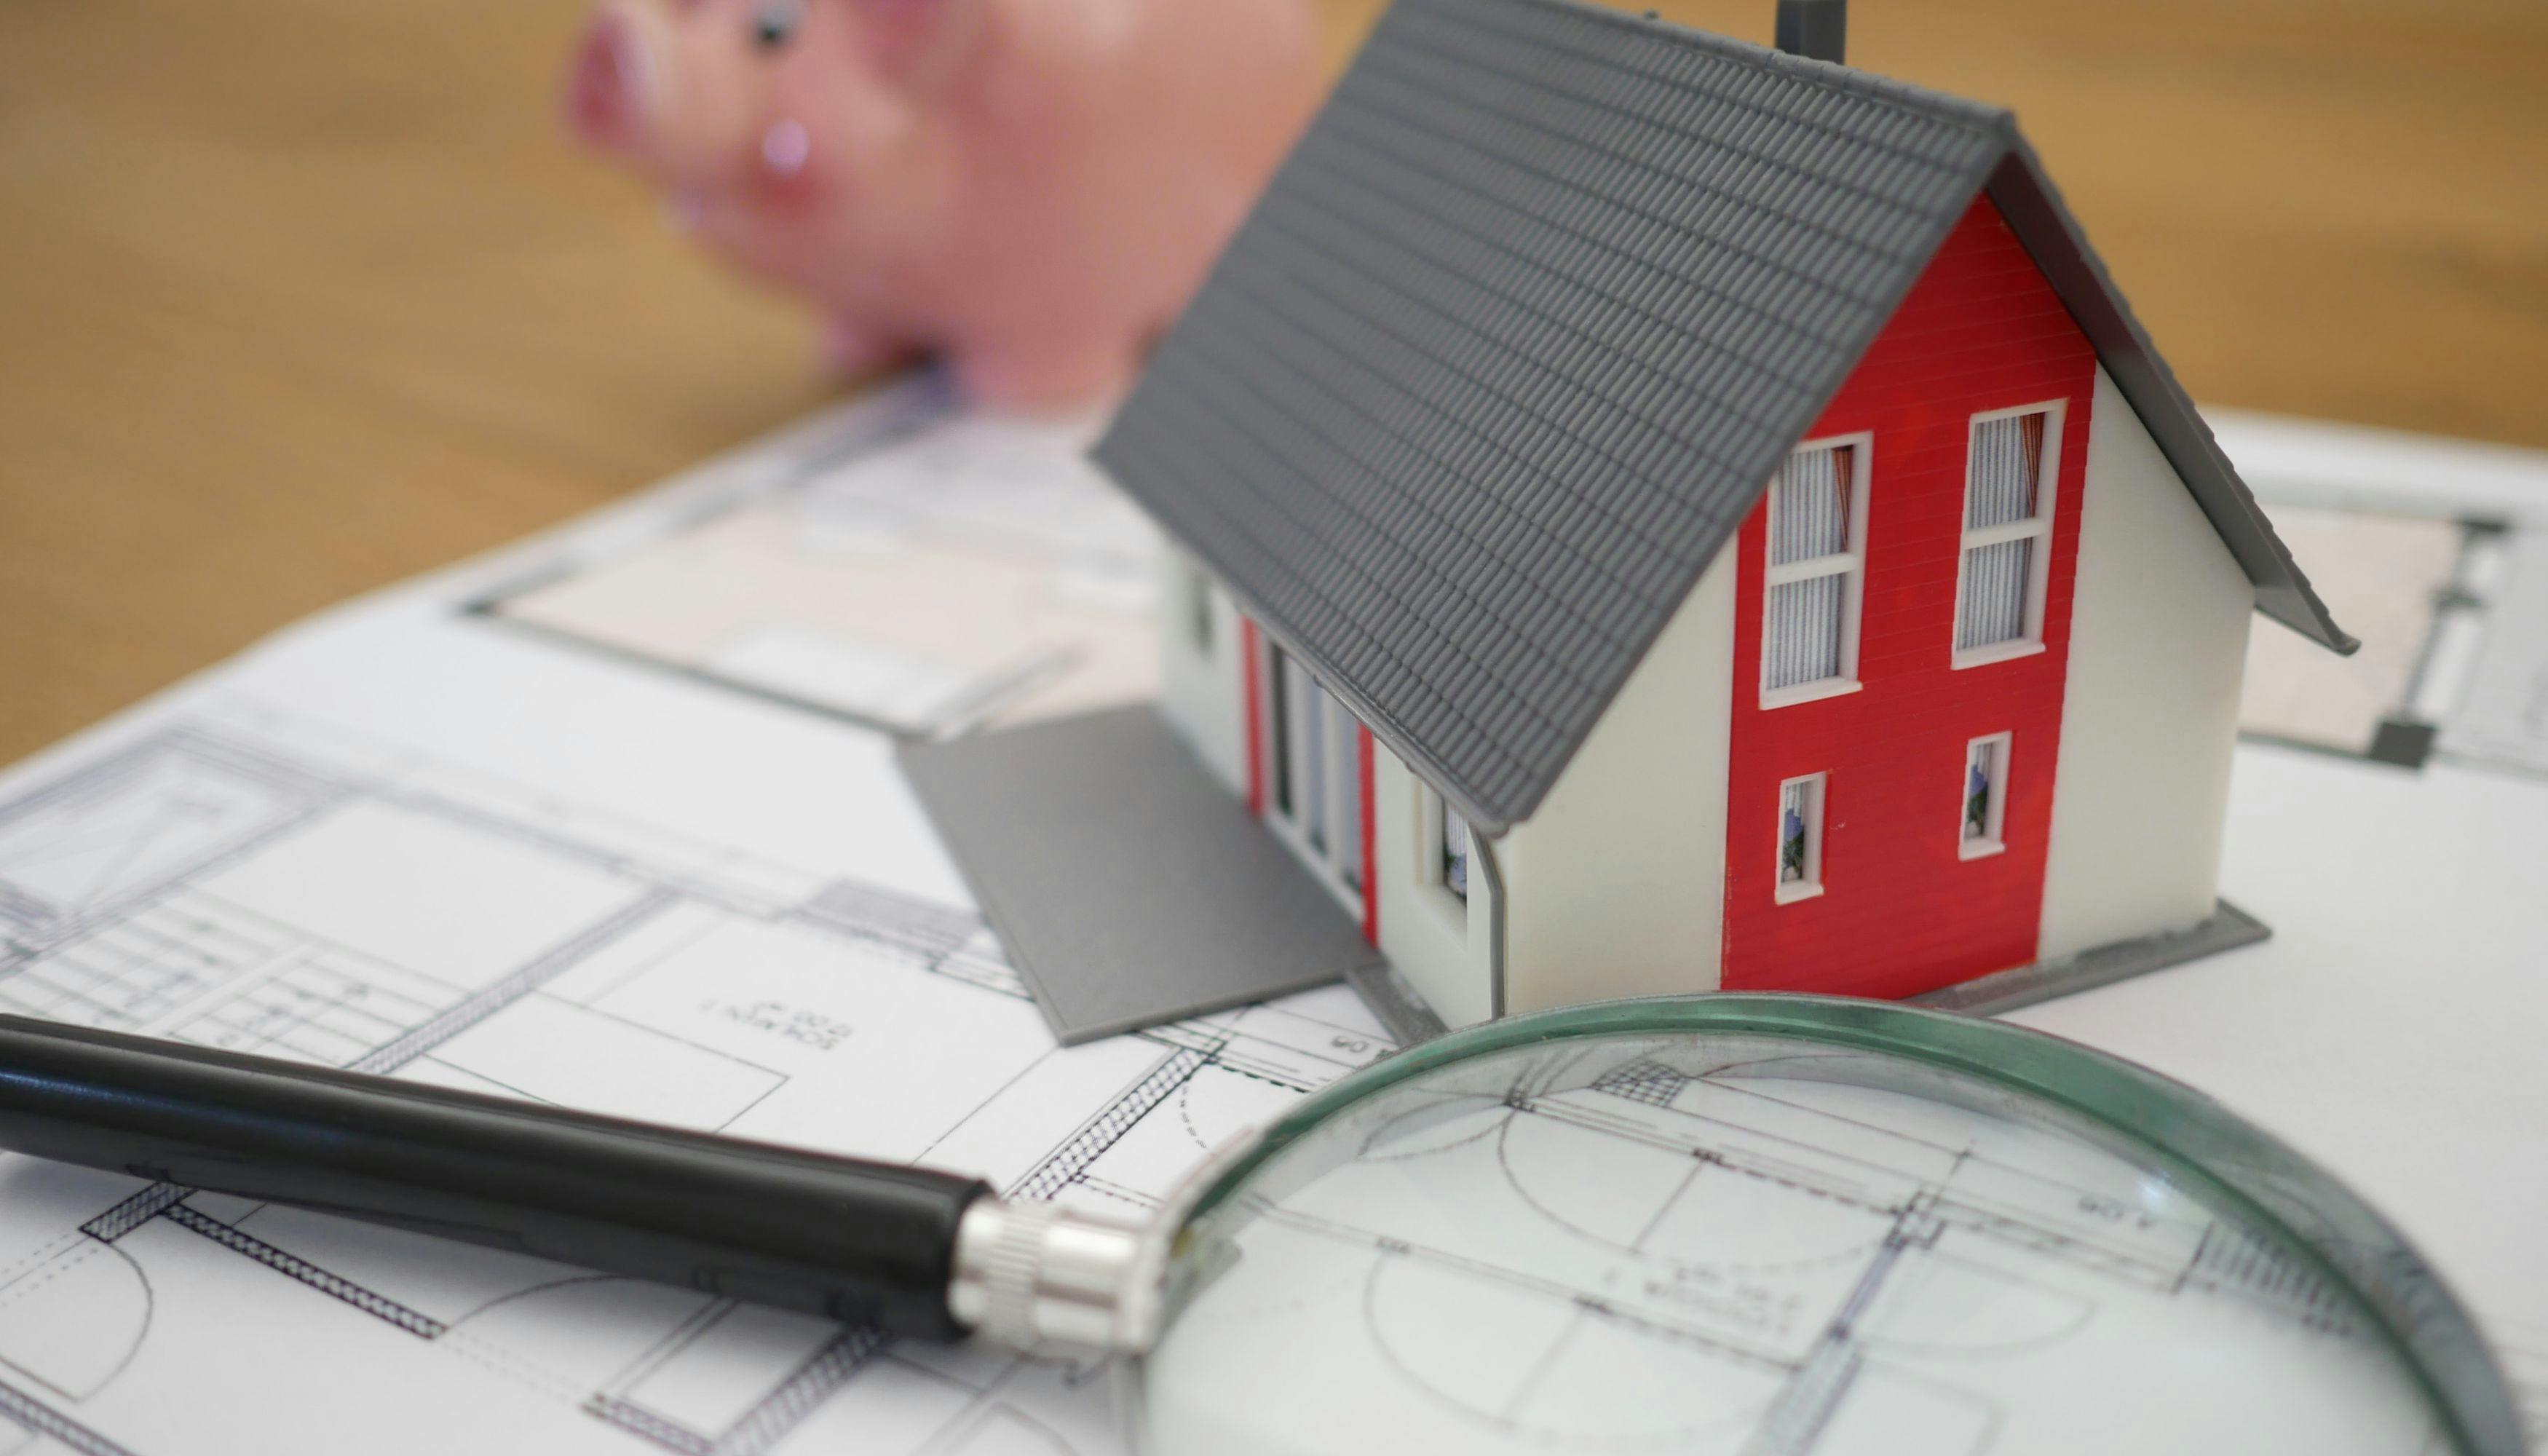 A blueprint featuring a house model, a magnifying glass, and a piggy bank, symbolizing the evaluation of roofing cost.